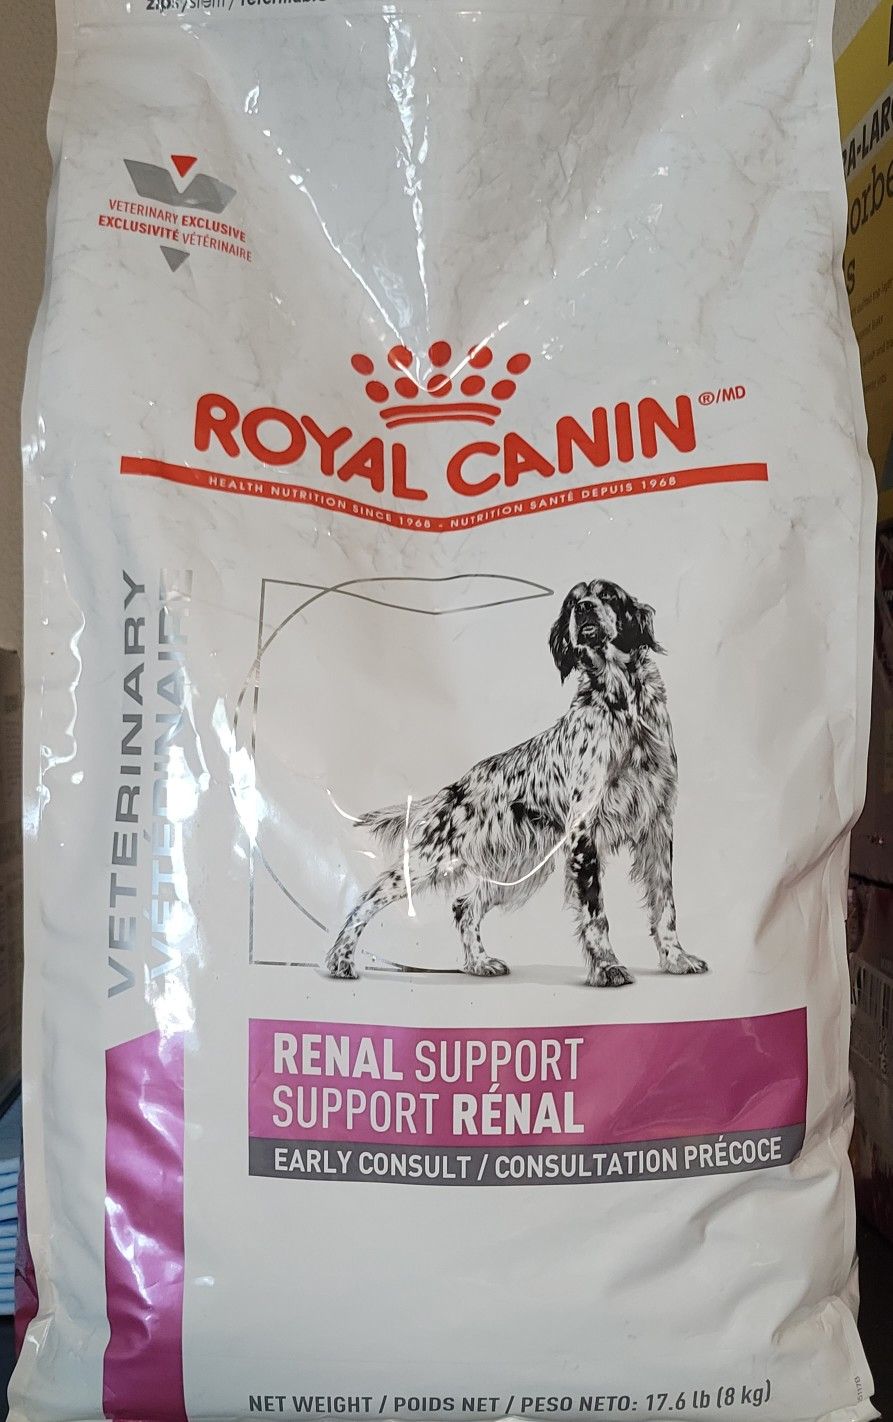 Royal Canin Renal Support Dog Food